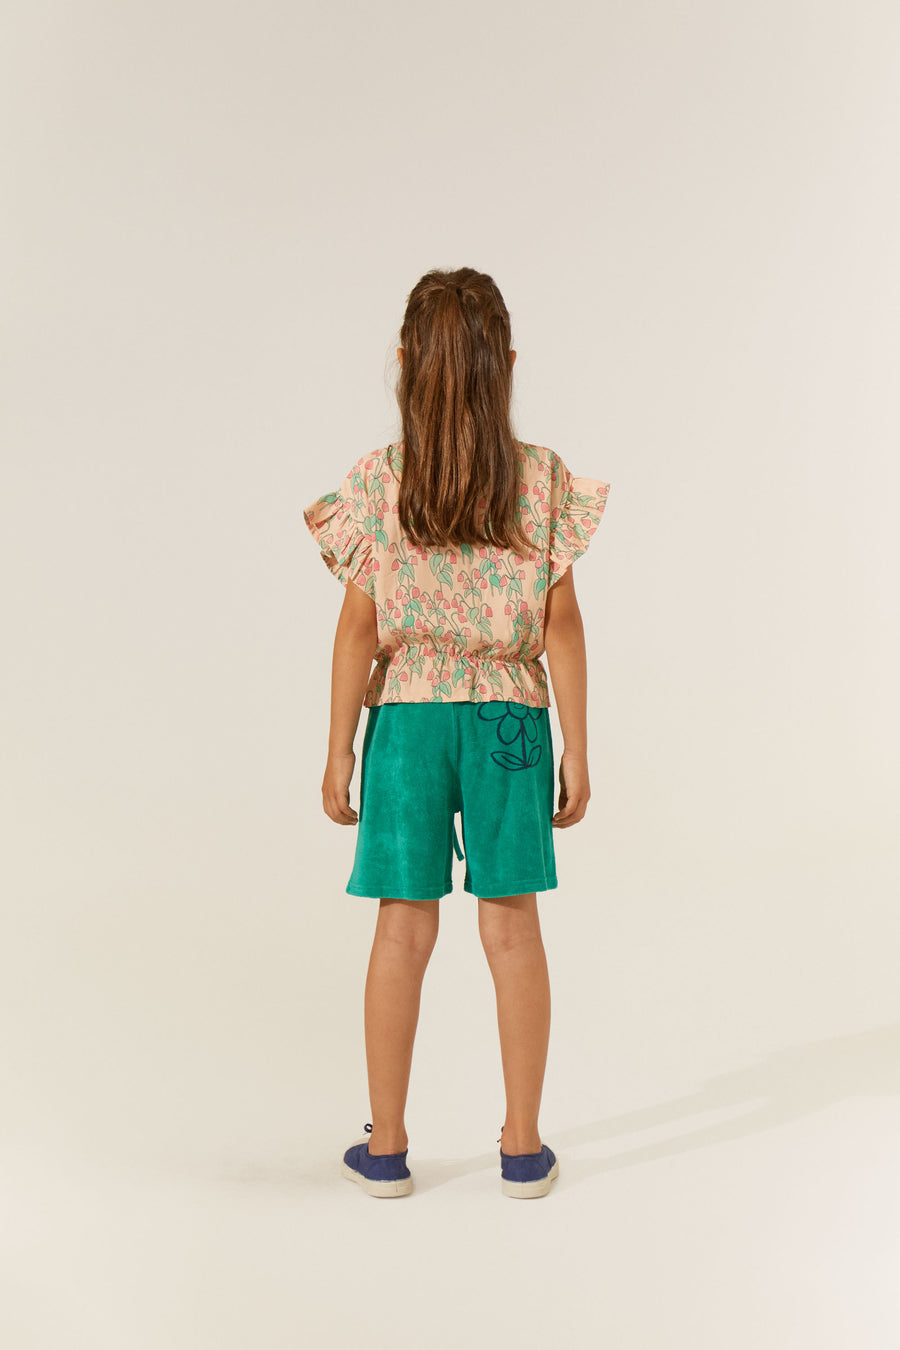 The Campamento Peach Flowers Blouse